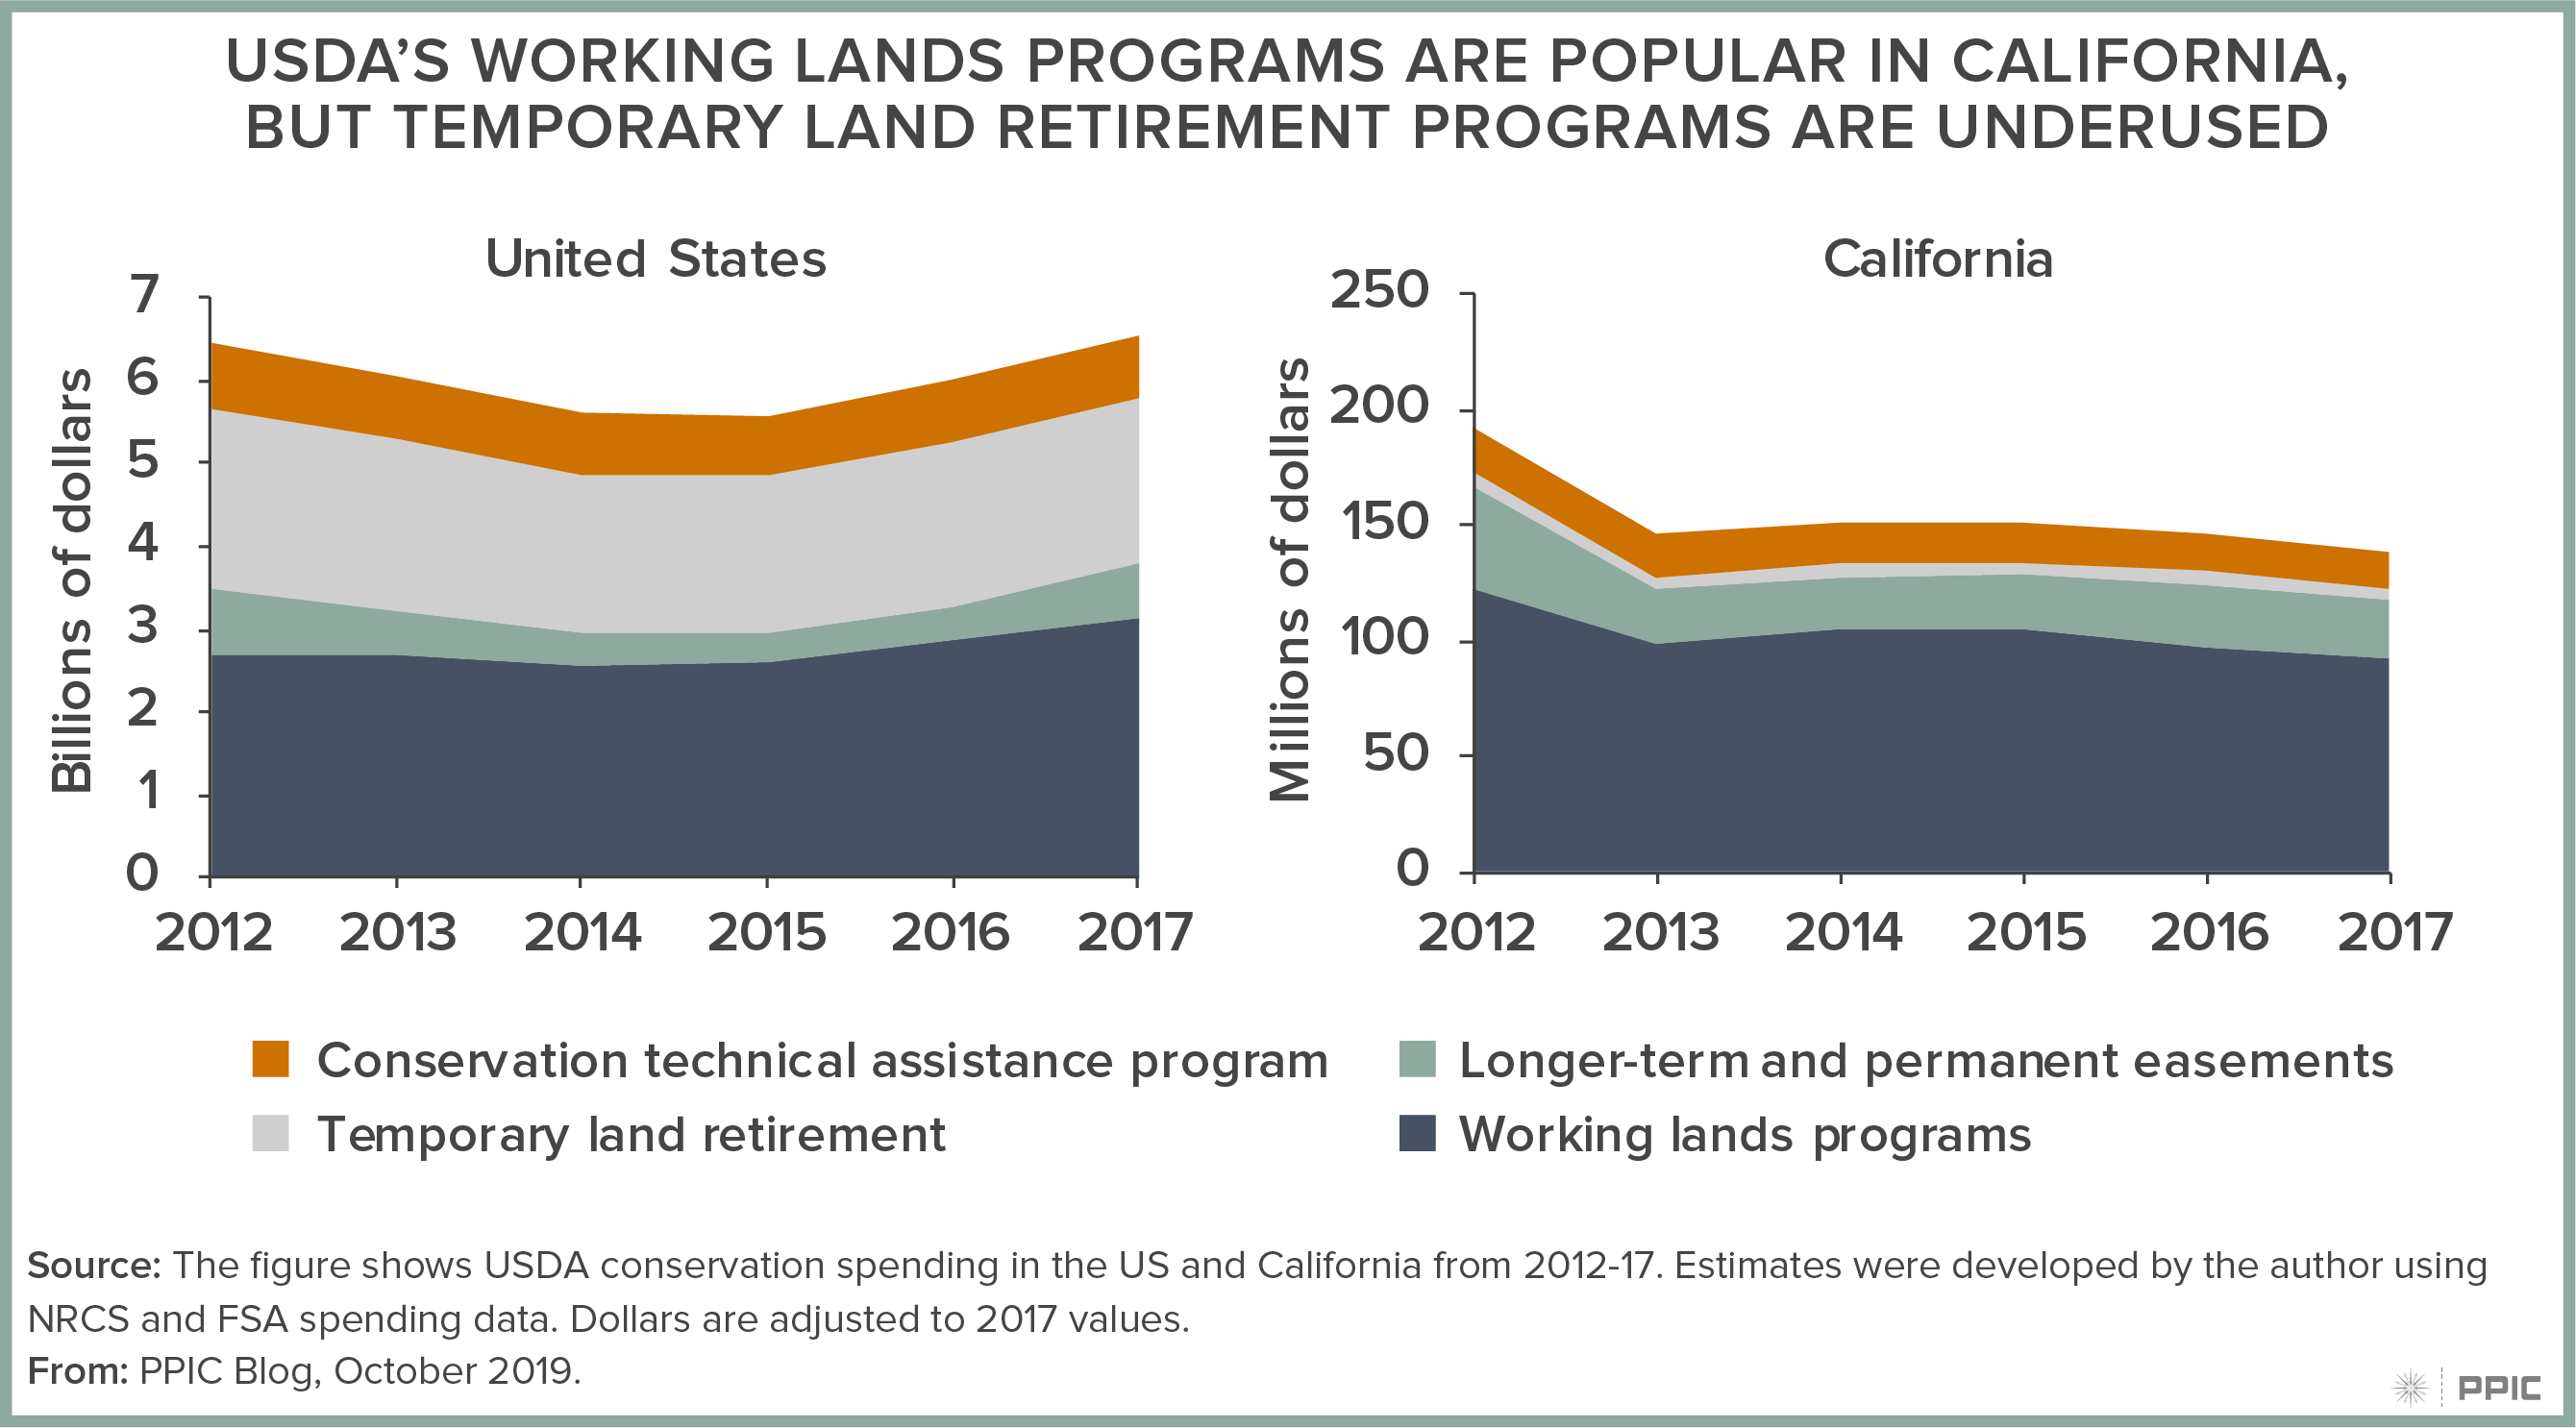 figure - USDA’s Working Lands Programs Are Popular in California, but Temporary Land Retirement Programs Are Underused